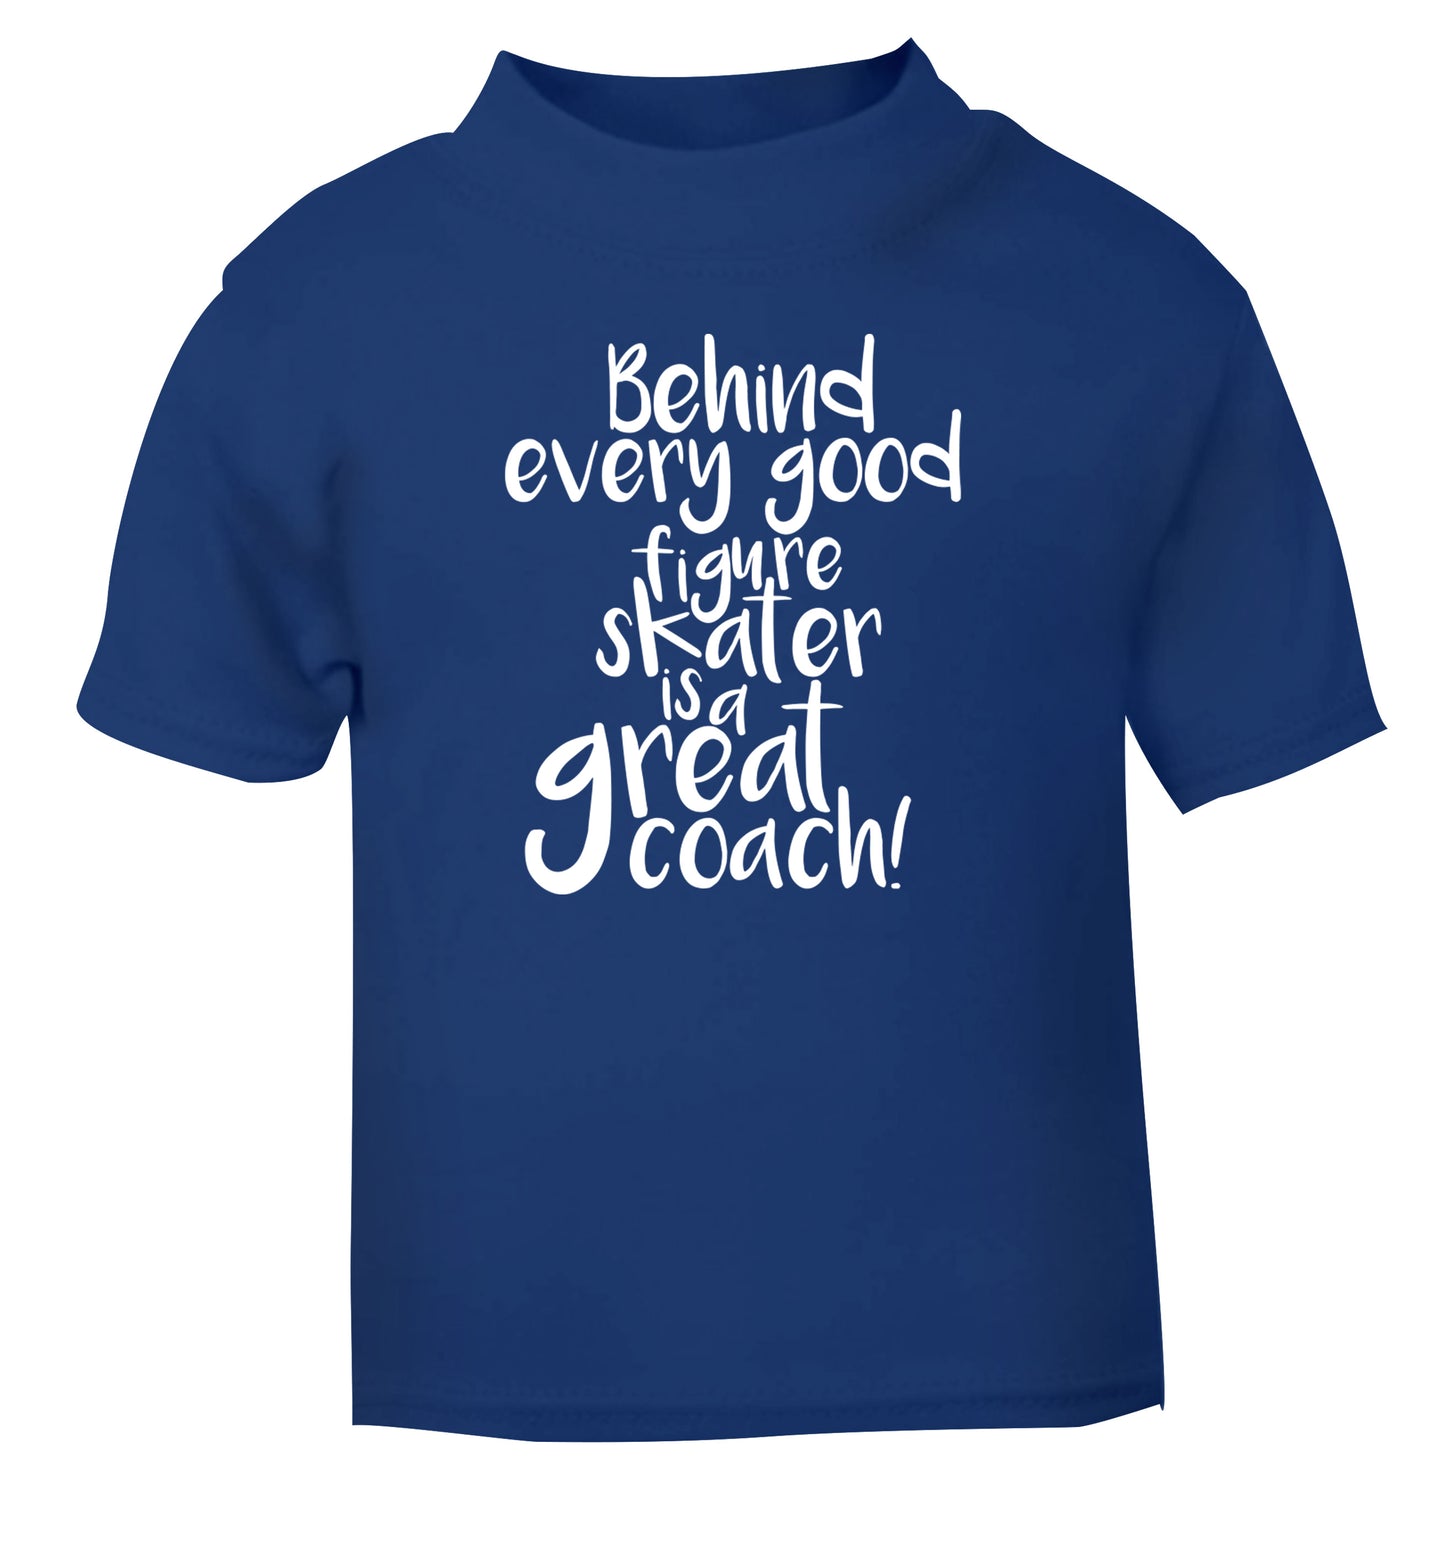 Behind every good figure skater is a great coach blue Baby Toddler Tshirt 2 Years